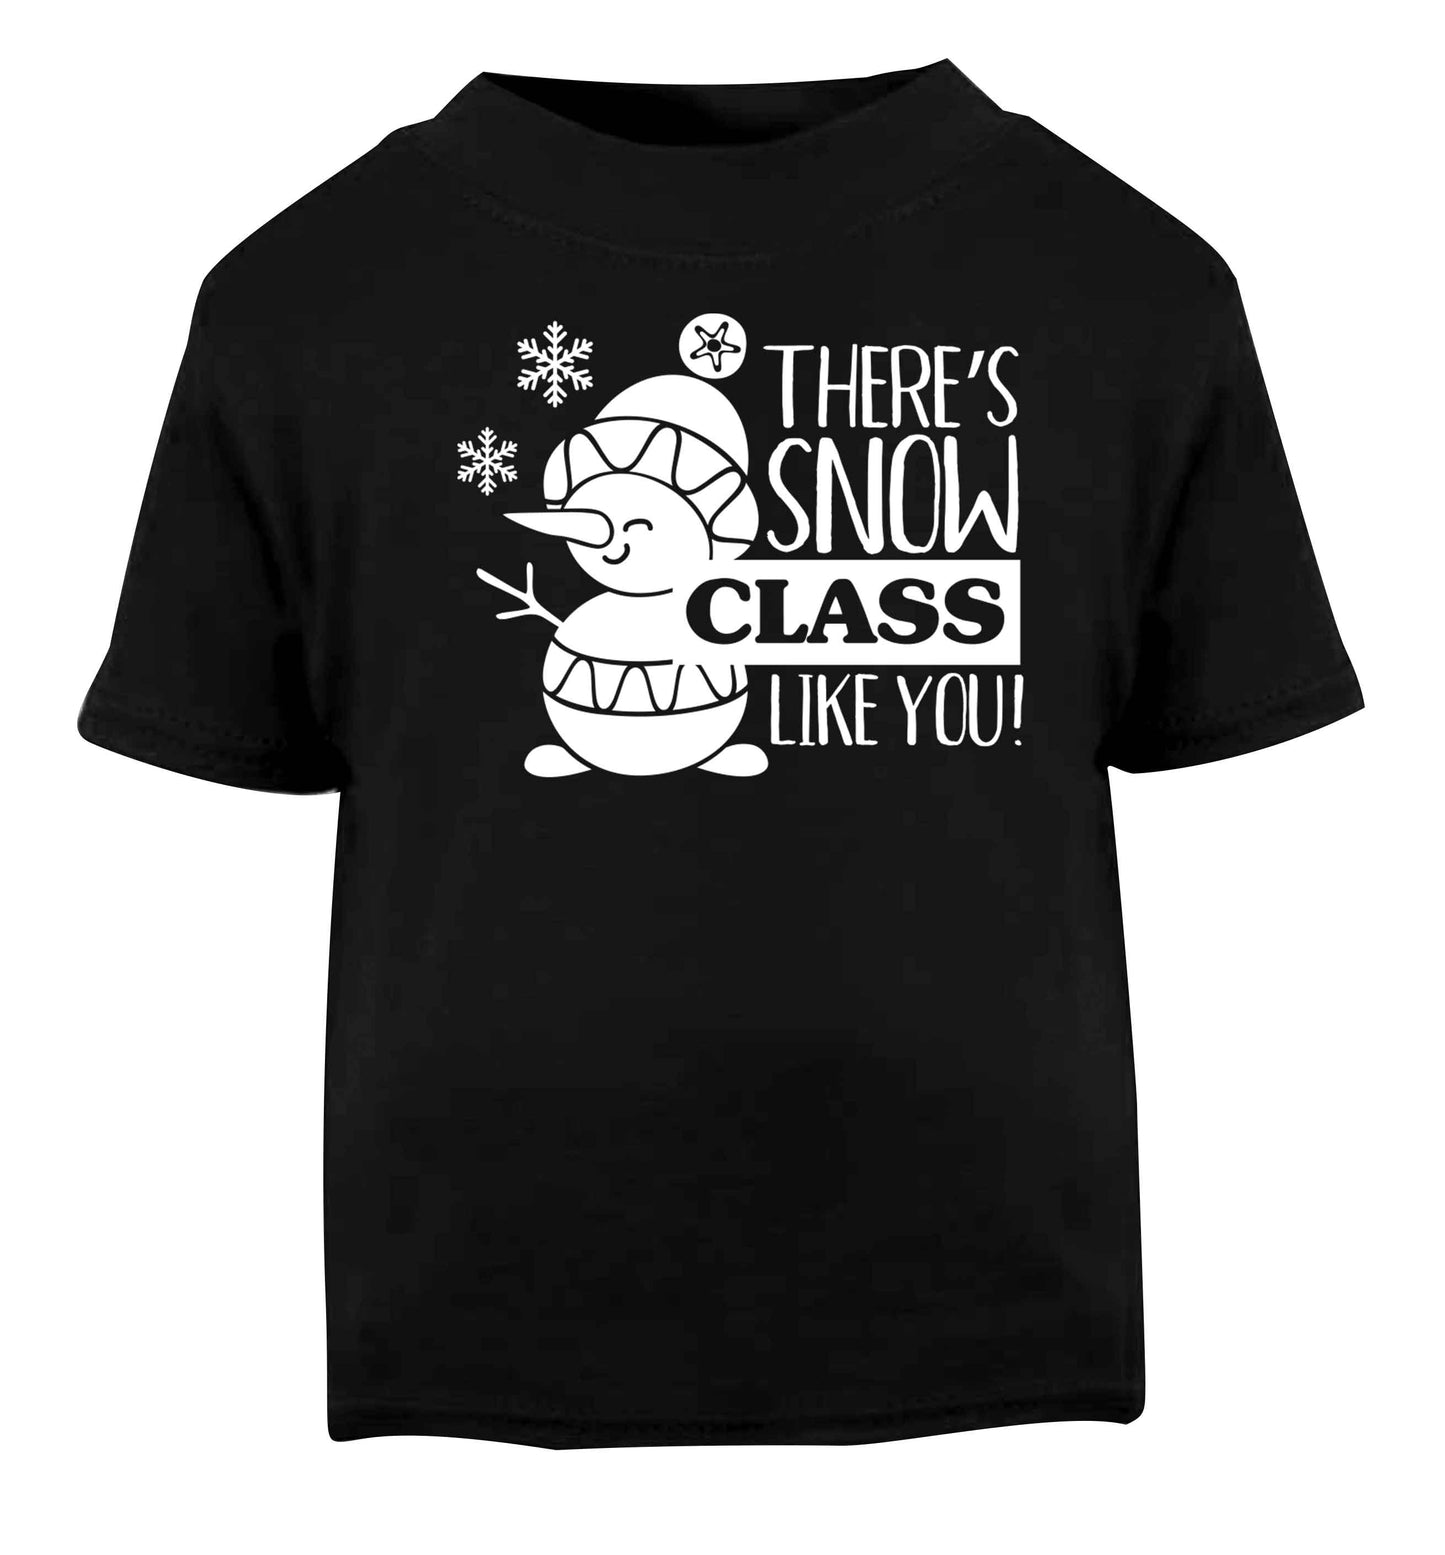 There's snow class like you Black baby toddler Tshirt 2 years